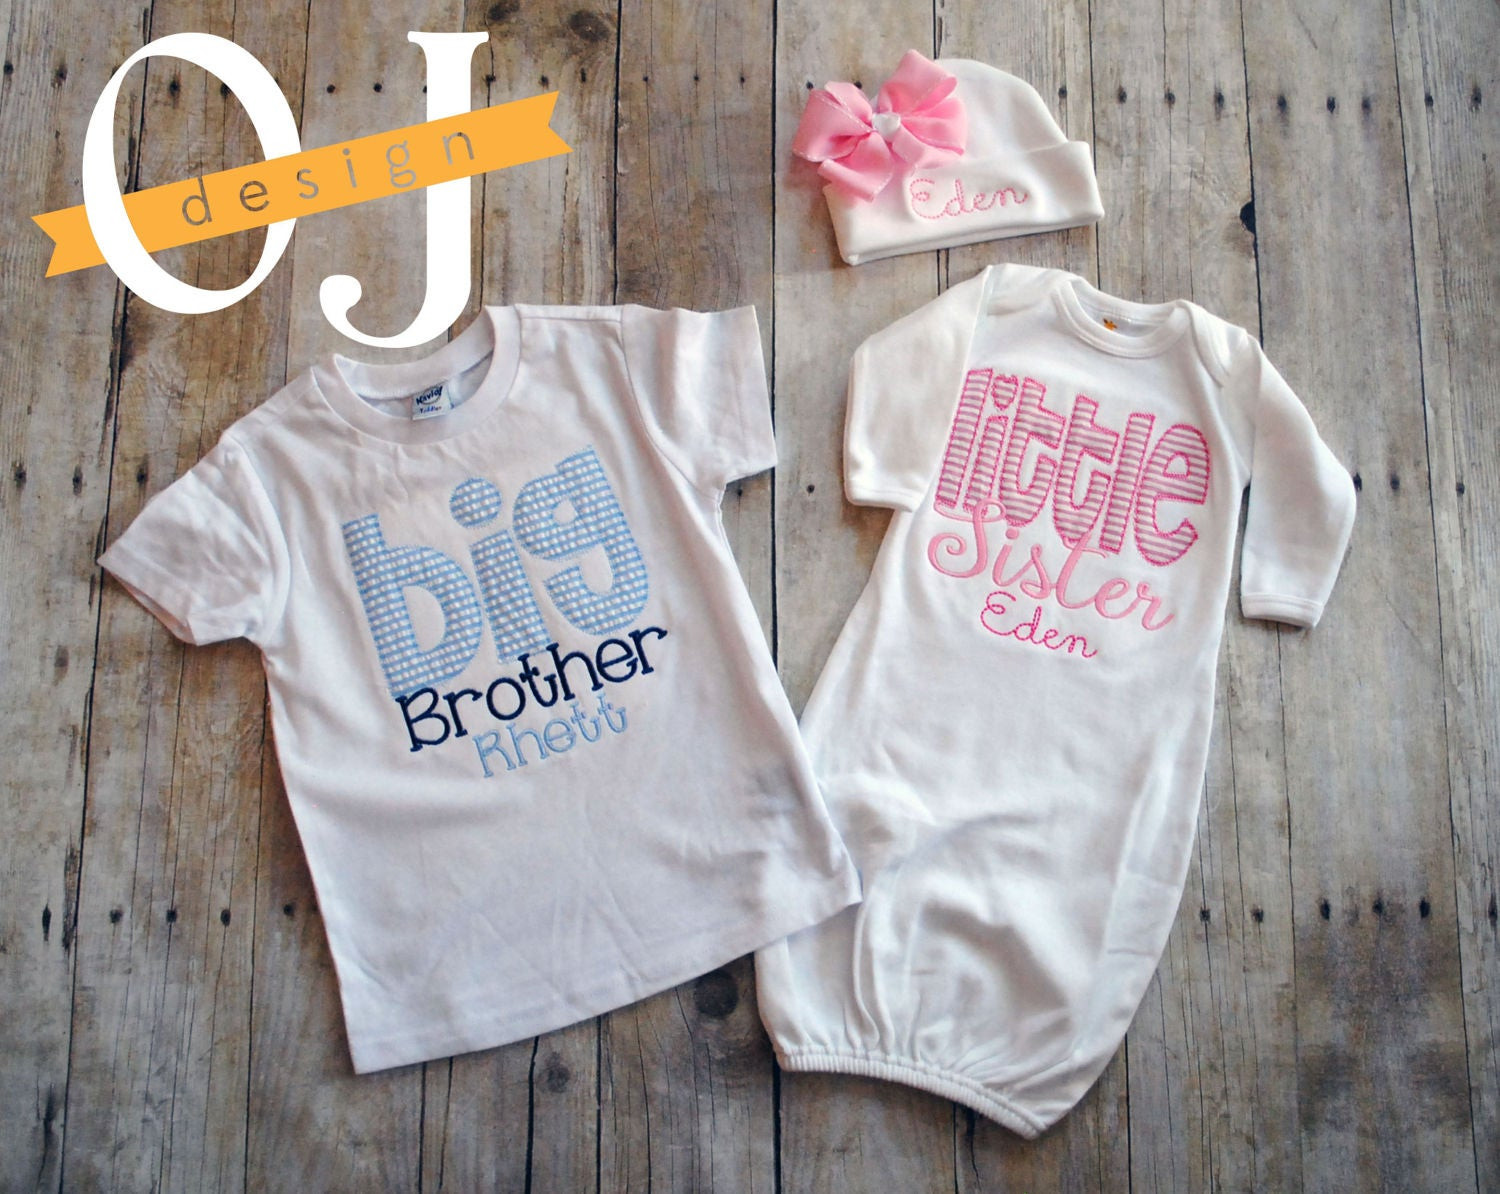 Baby Brother Gifts
 Big Brother Little Sister Personalized Baby Newborn Gift Set